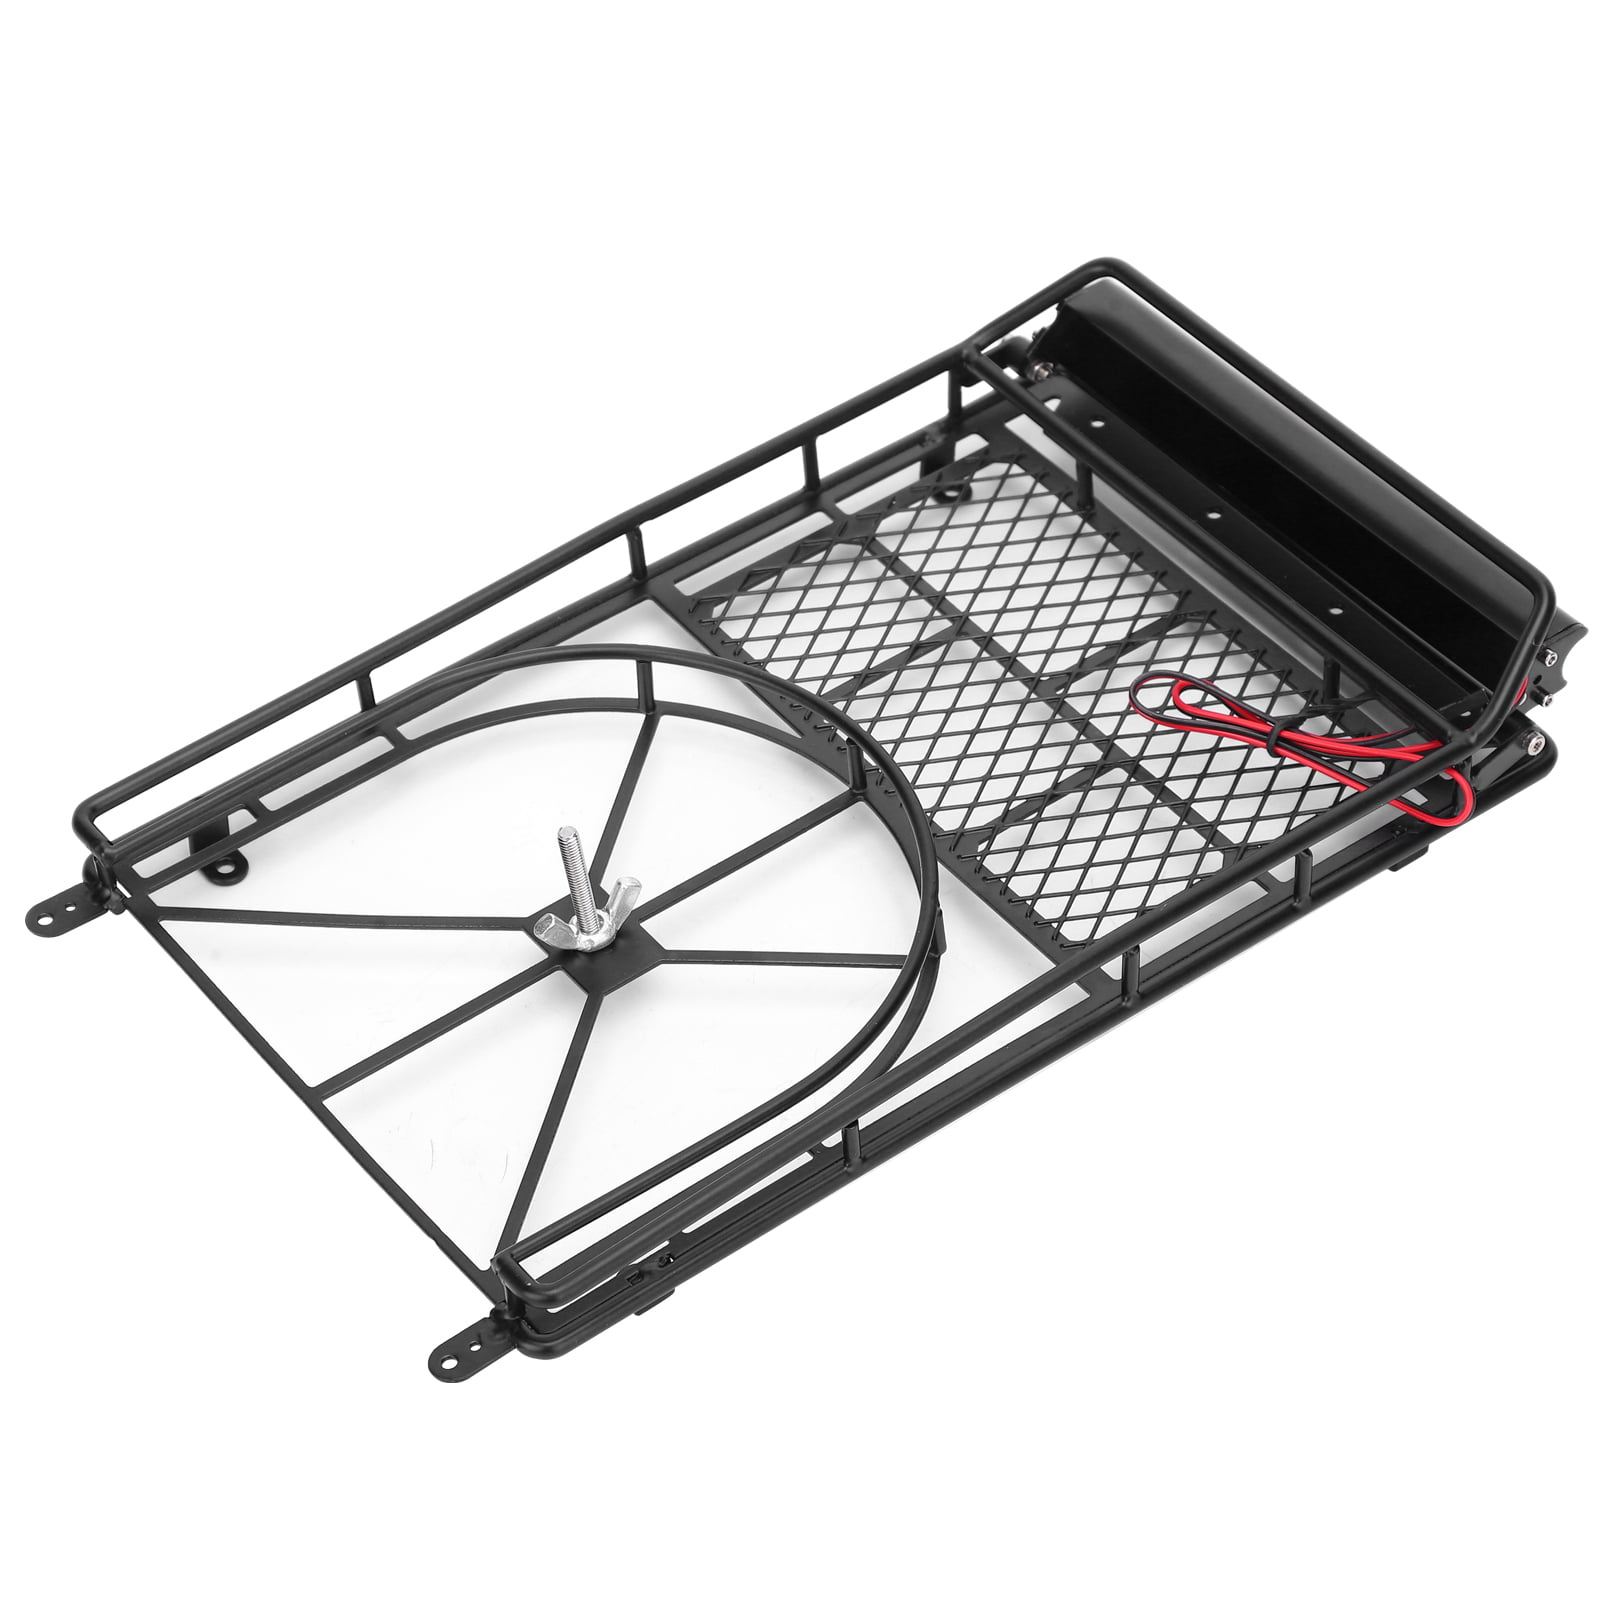 Replacement Metal Roof Rack Luggage Baggage Carrier for 1/10 HSP RC Trucks 